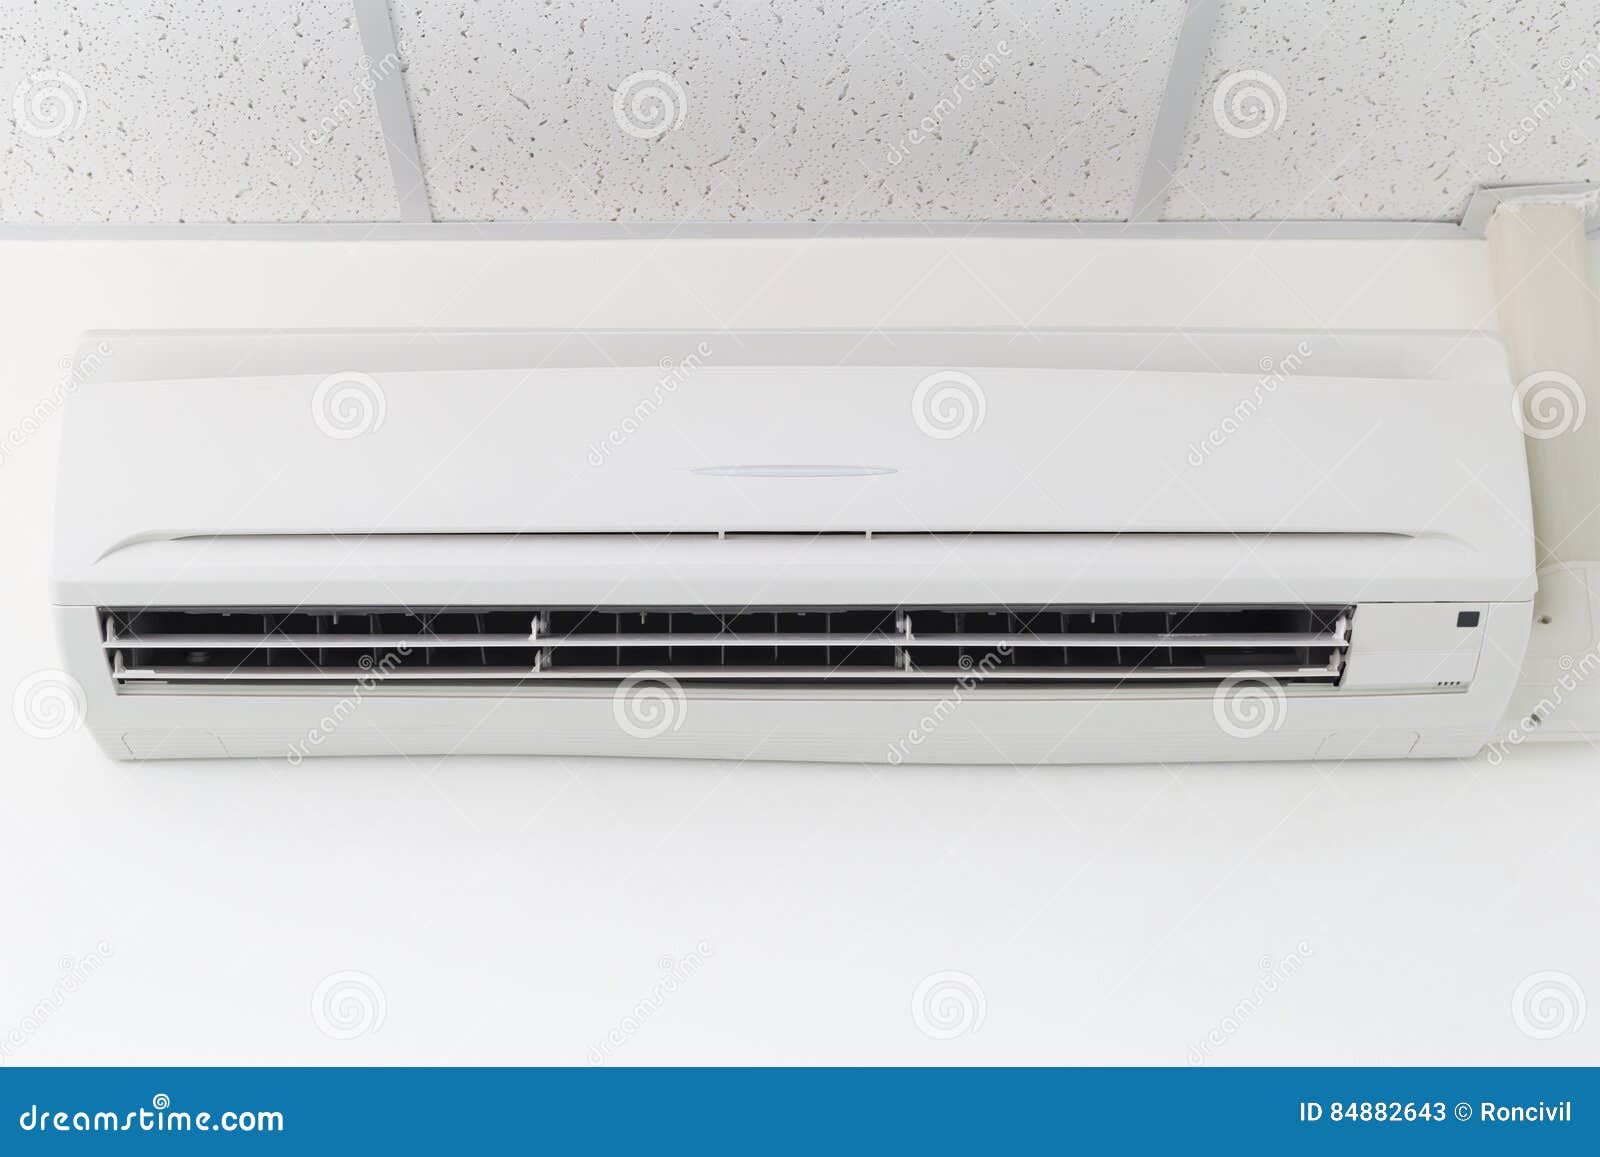 Air conditioner inside stock image. Image of cold, home - 84882643